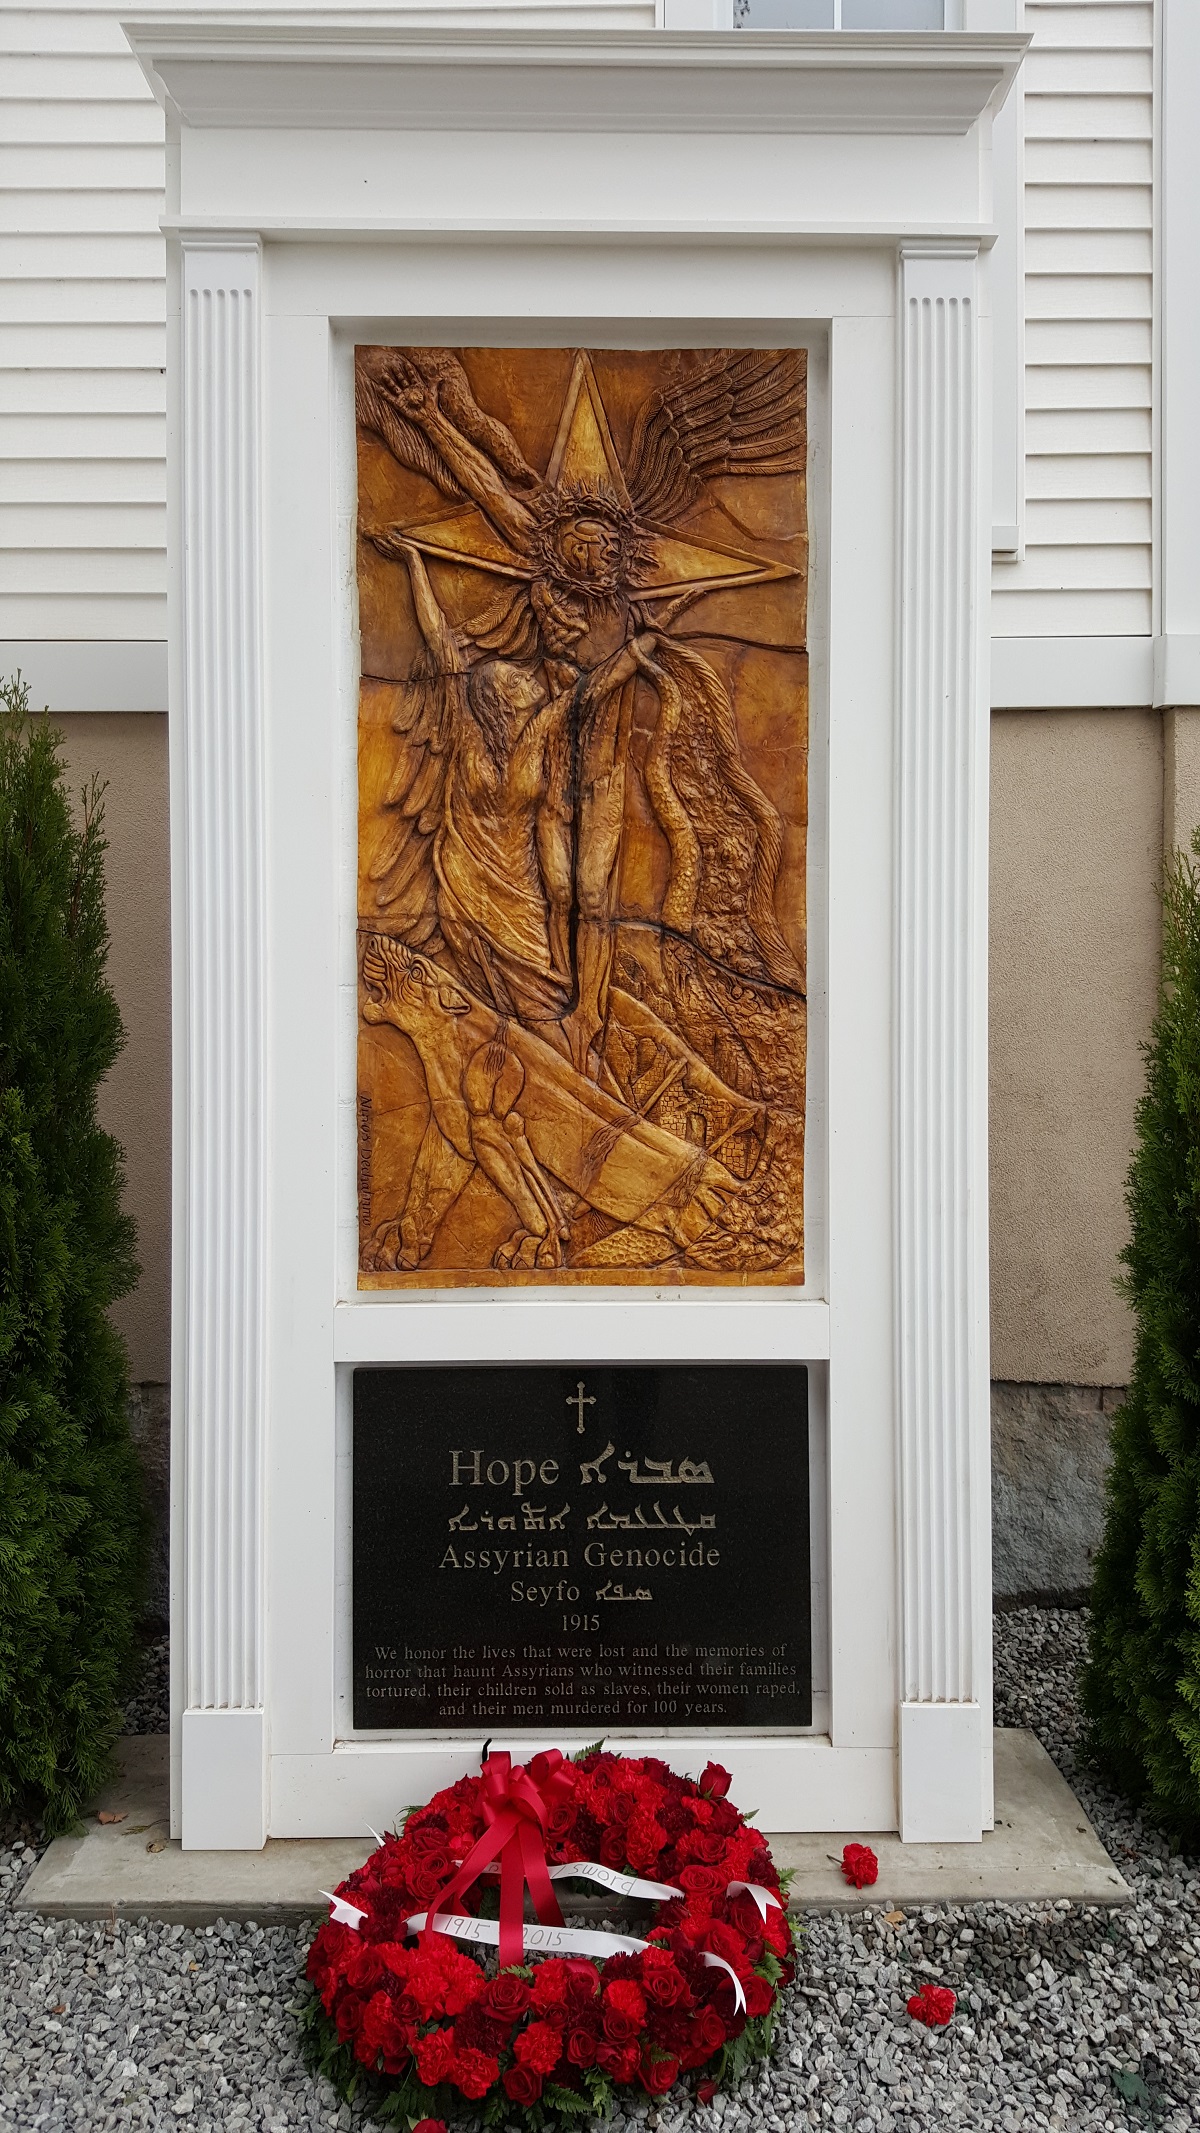 Assyrian Genocide Monument Unveiled in Boston